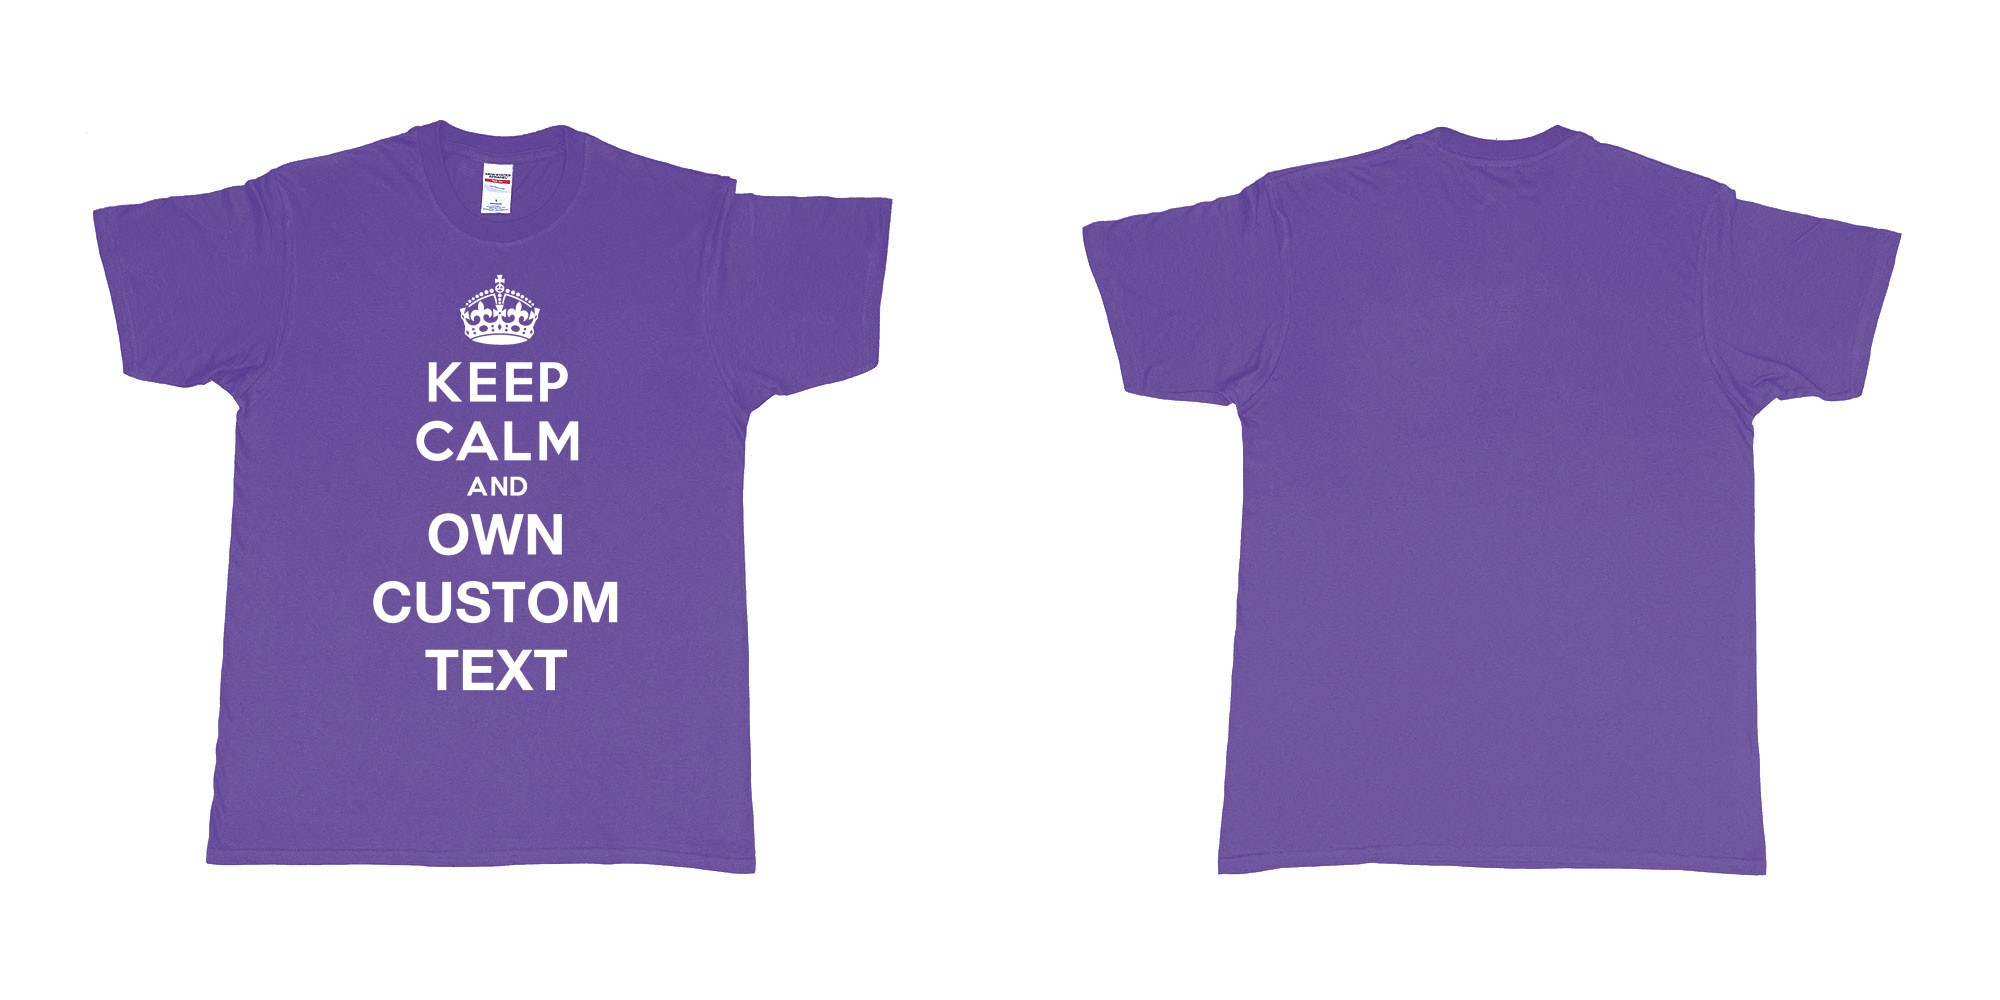 Custom tshirt design Keep Calm And in fabric color purple choice your own text made in Bali by The Pirate Way